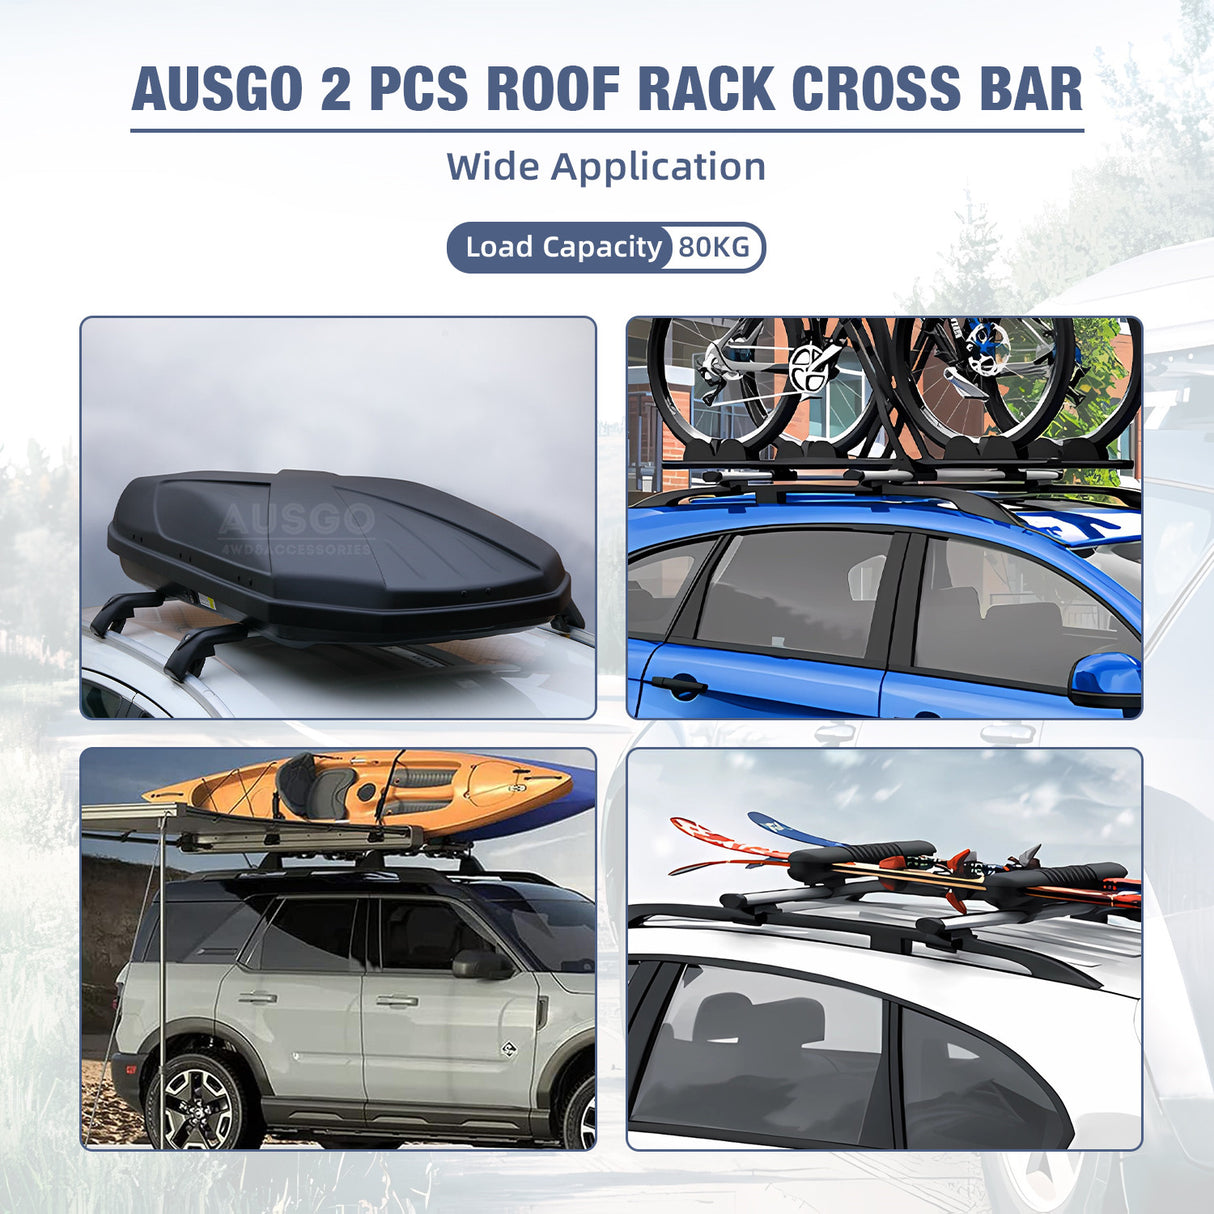 1 Pair Aluminum Cross Bar for Mercedes Benz C-Class C Class C250 wagon 2010-2014 with raised rail Luggage Carrier Roof Rack